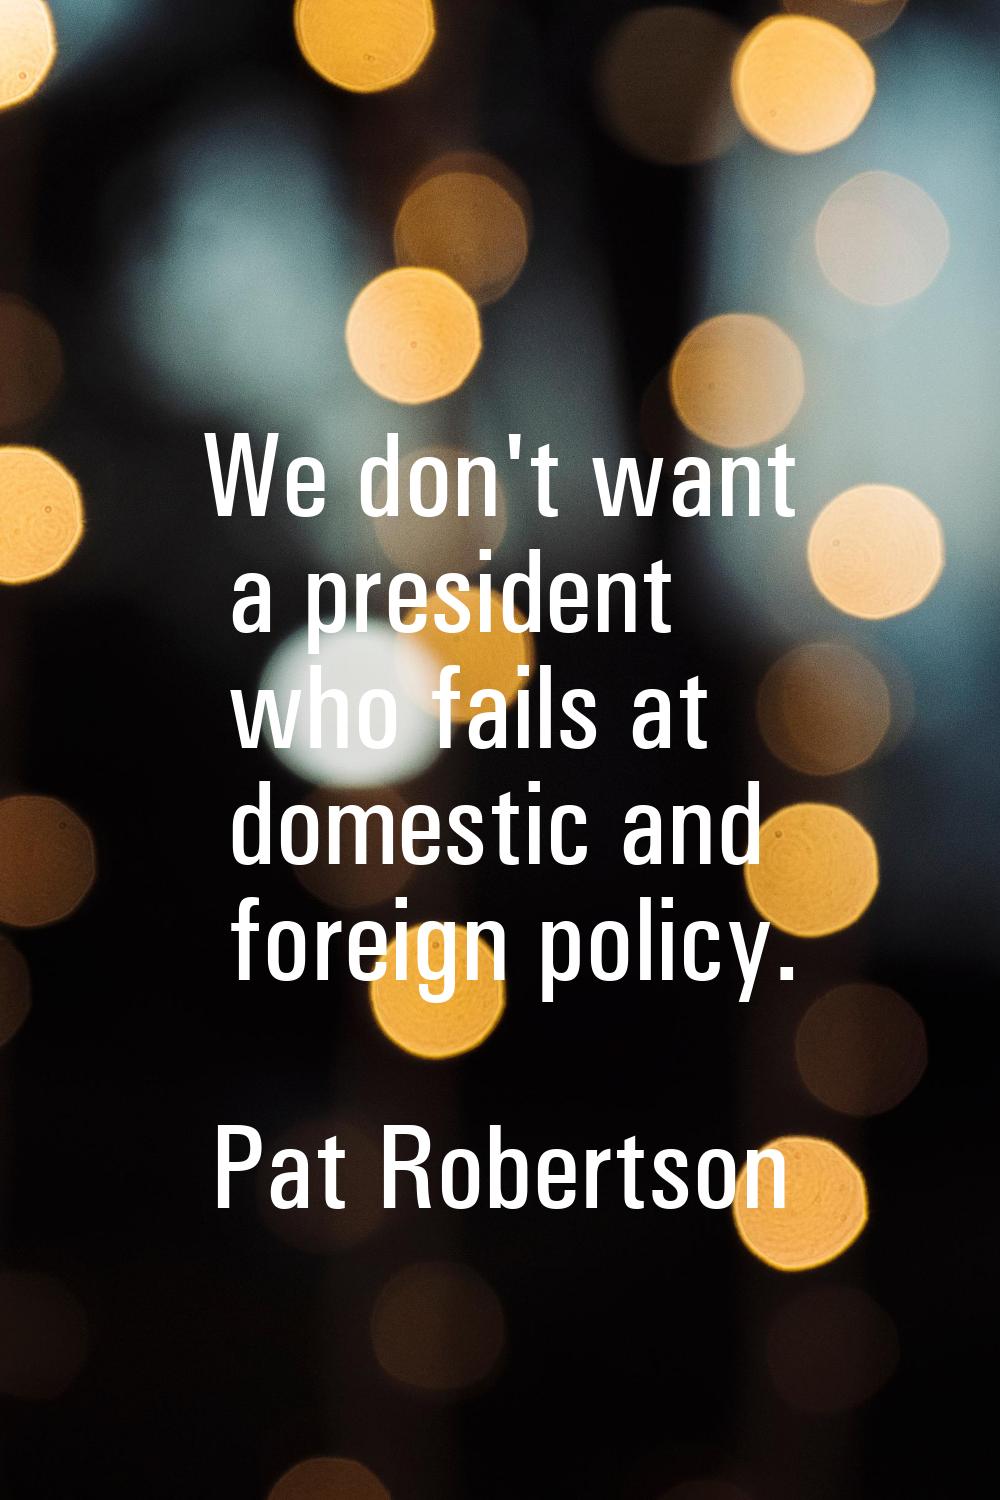 We don't want a president who fails at domestic and foreign policy.